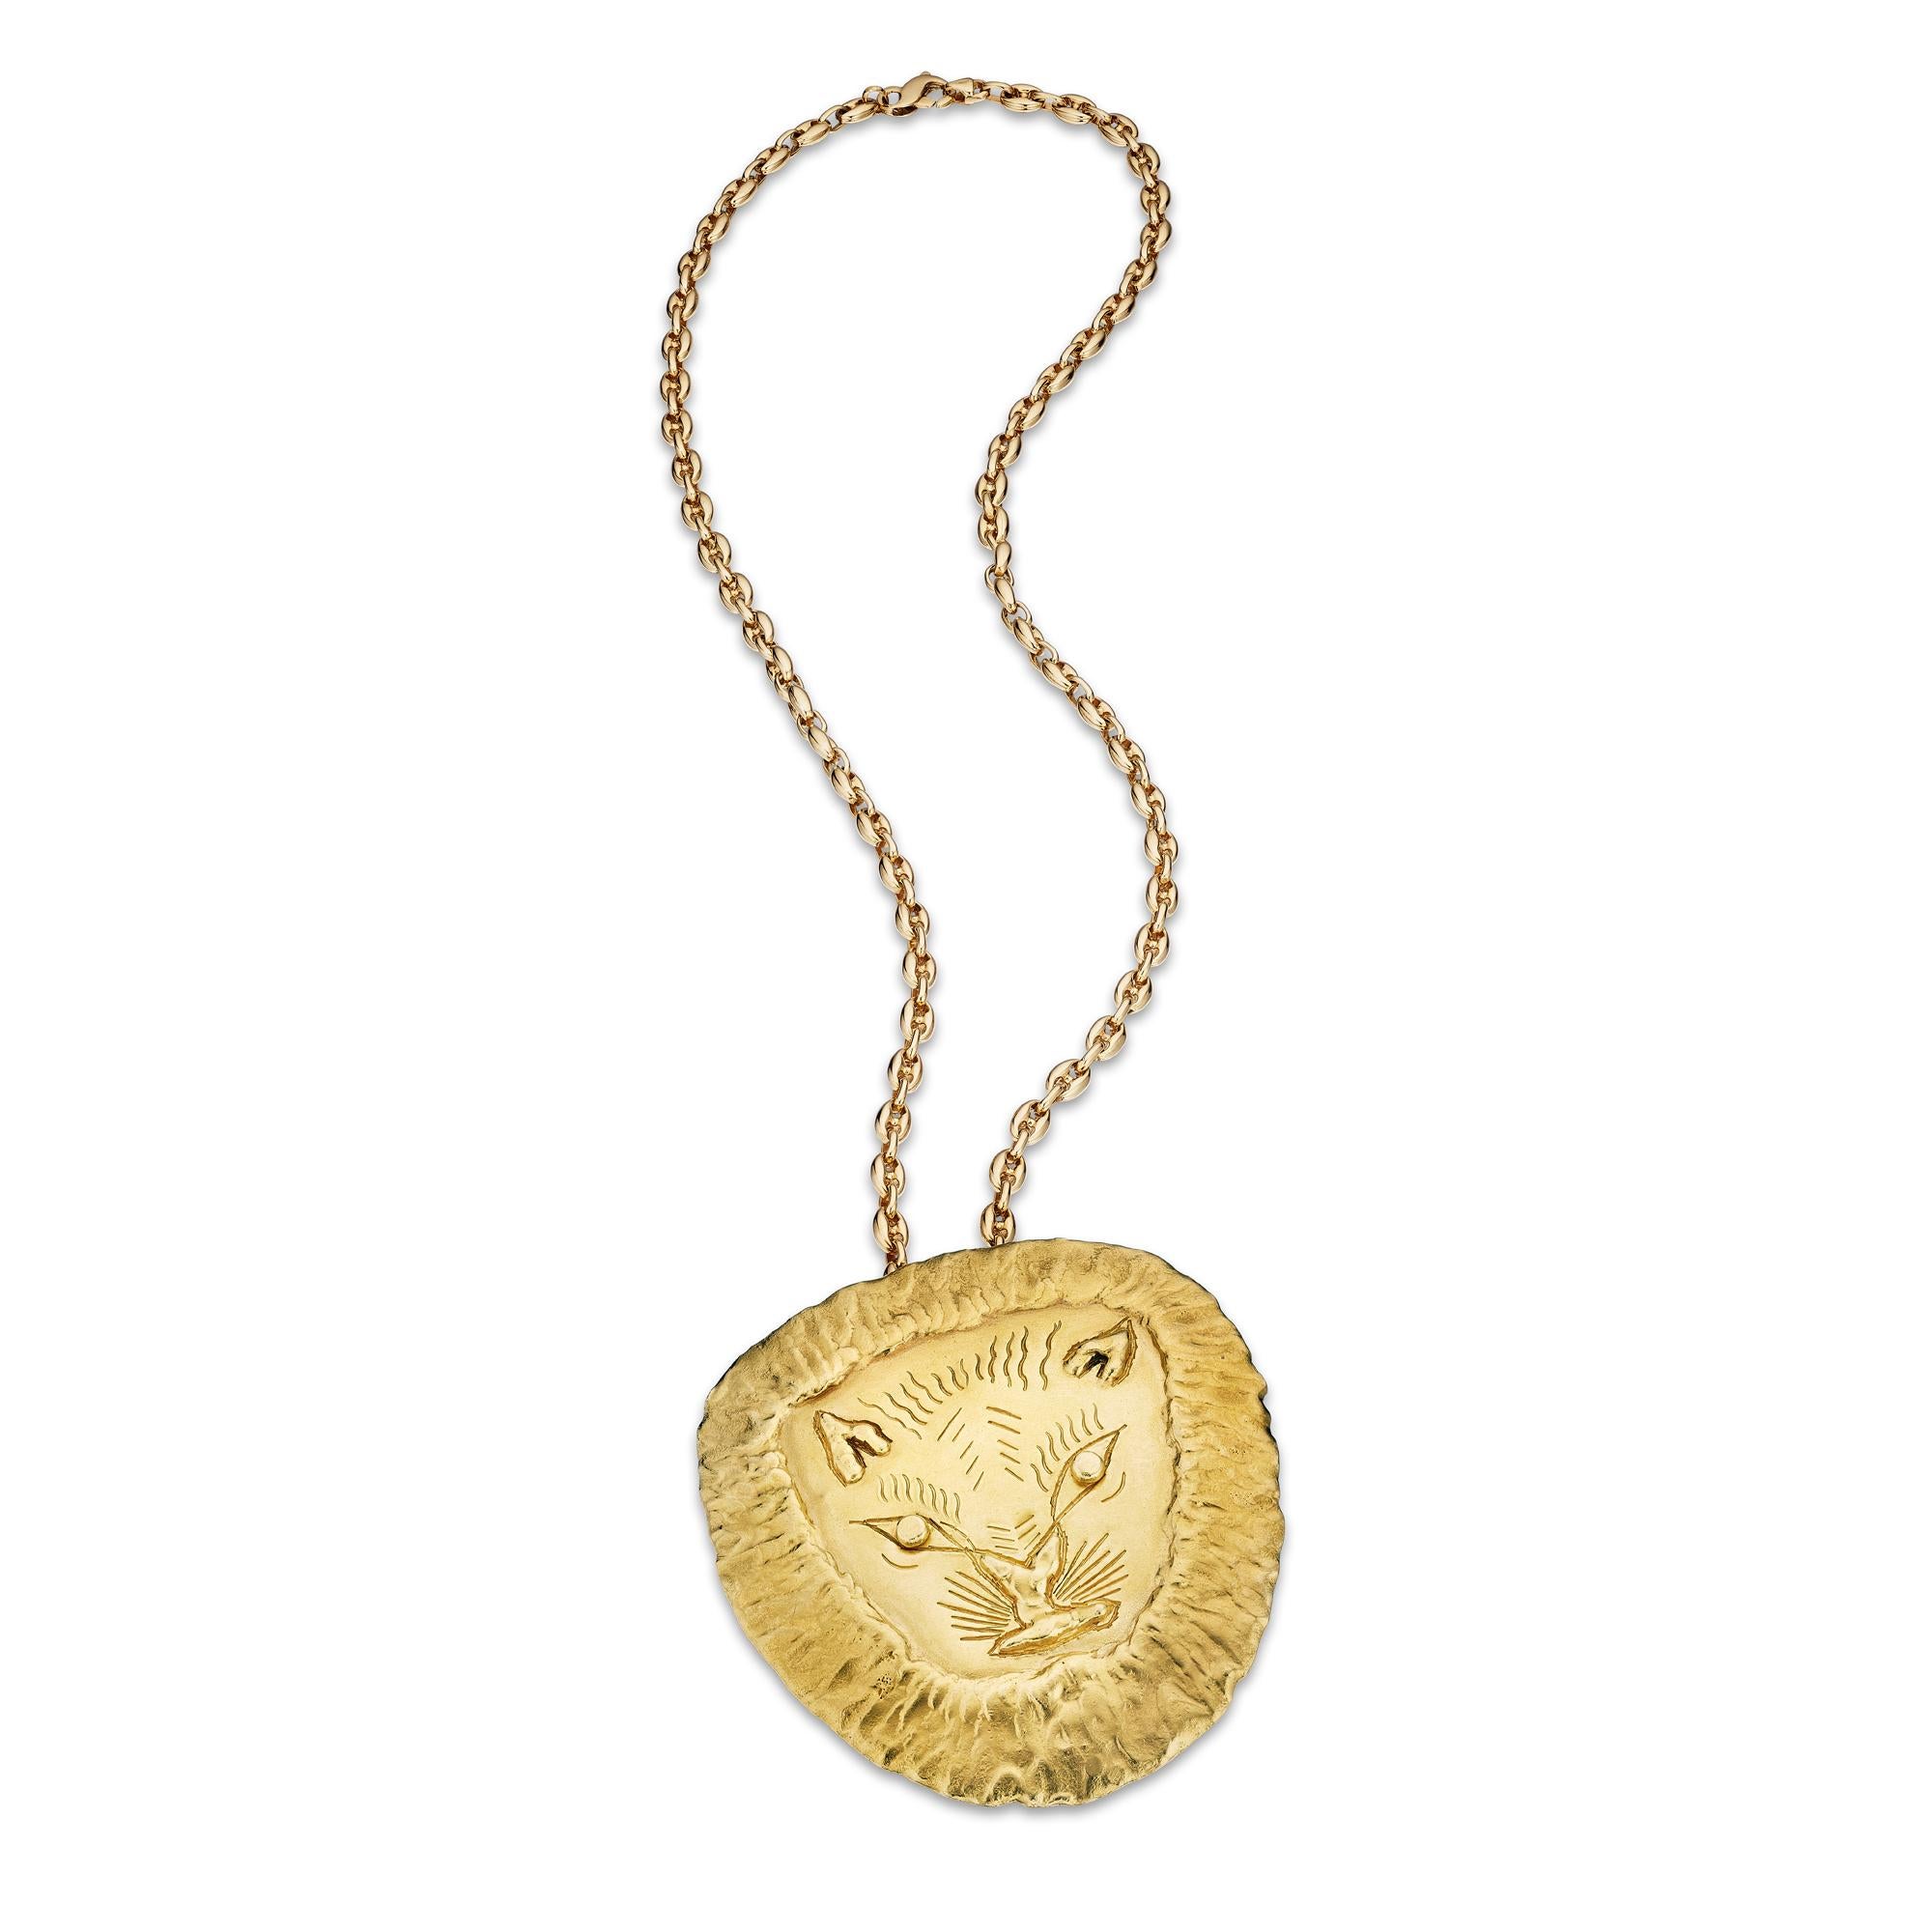 A powerful handmade one-of-a-kind Jean Mahie vintage pendant is destined for the lion hearted!  With a courageously crafted lion face, this vintage statement pendant is all strength.  Signed Jean Mahie.  22 karat yellow gold.  Circa 1980.  3 1/4